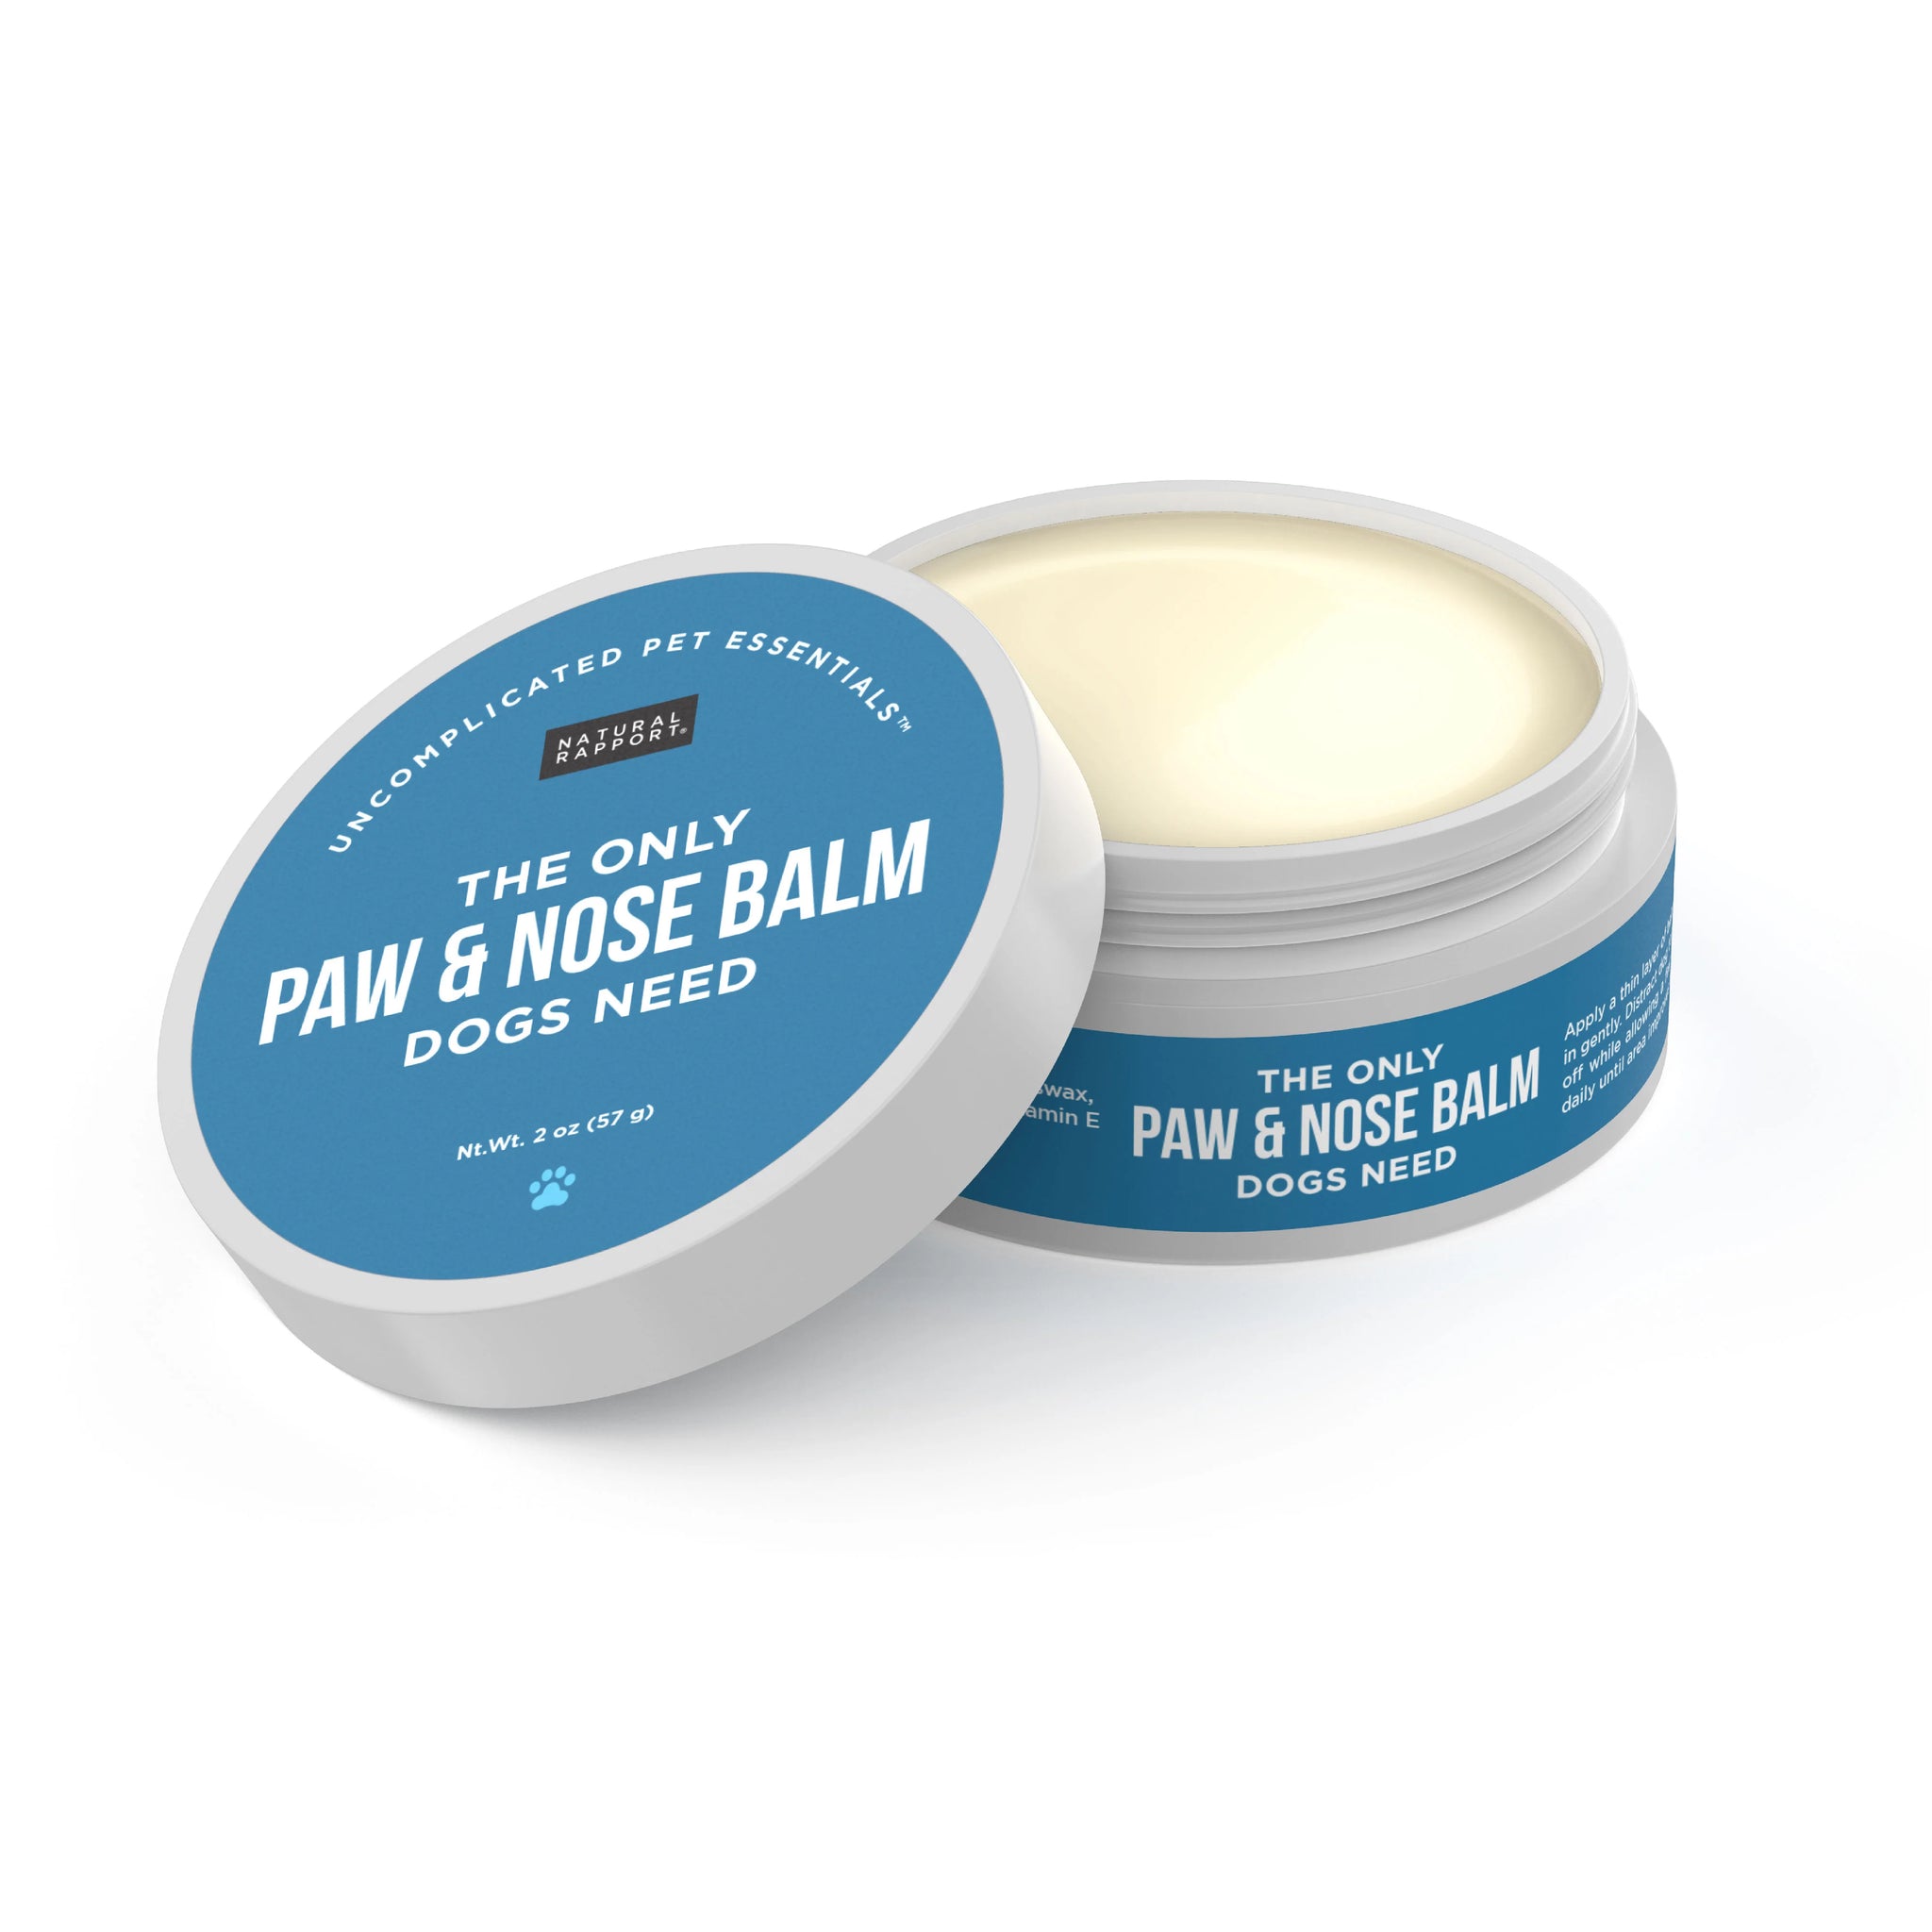 THE ONLY PAW & NOSE BALM DOGS NEED - Paw Butter for Dogs, Nose Butter for Dogs, Paw Balm for Dogs, Nose Balm for Dogs